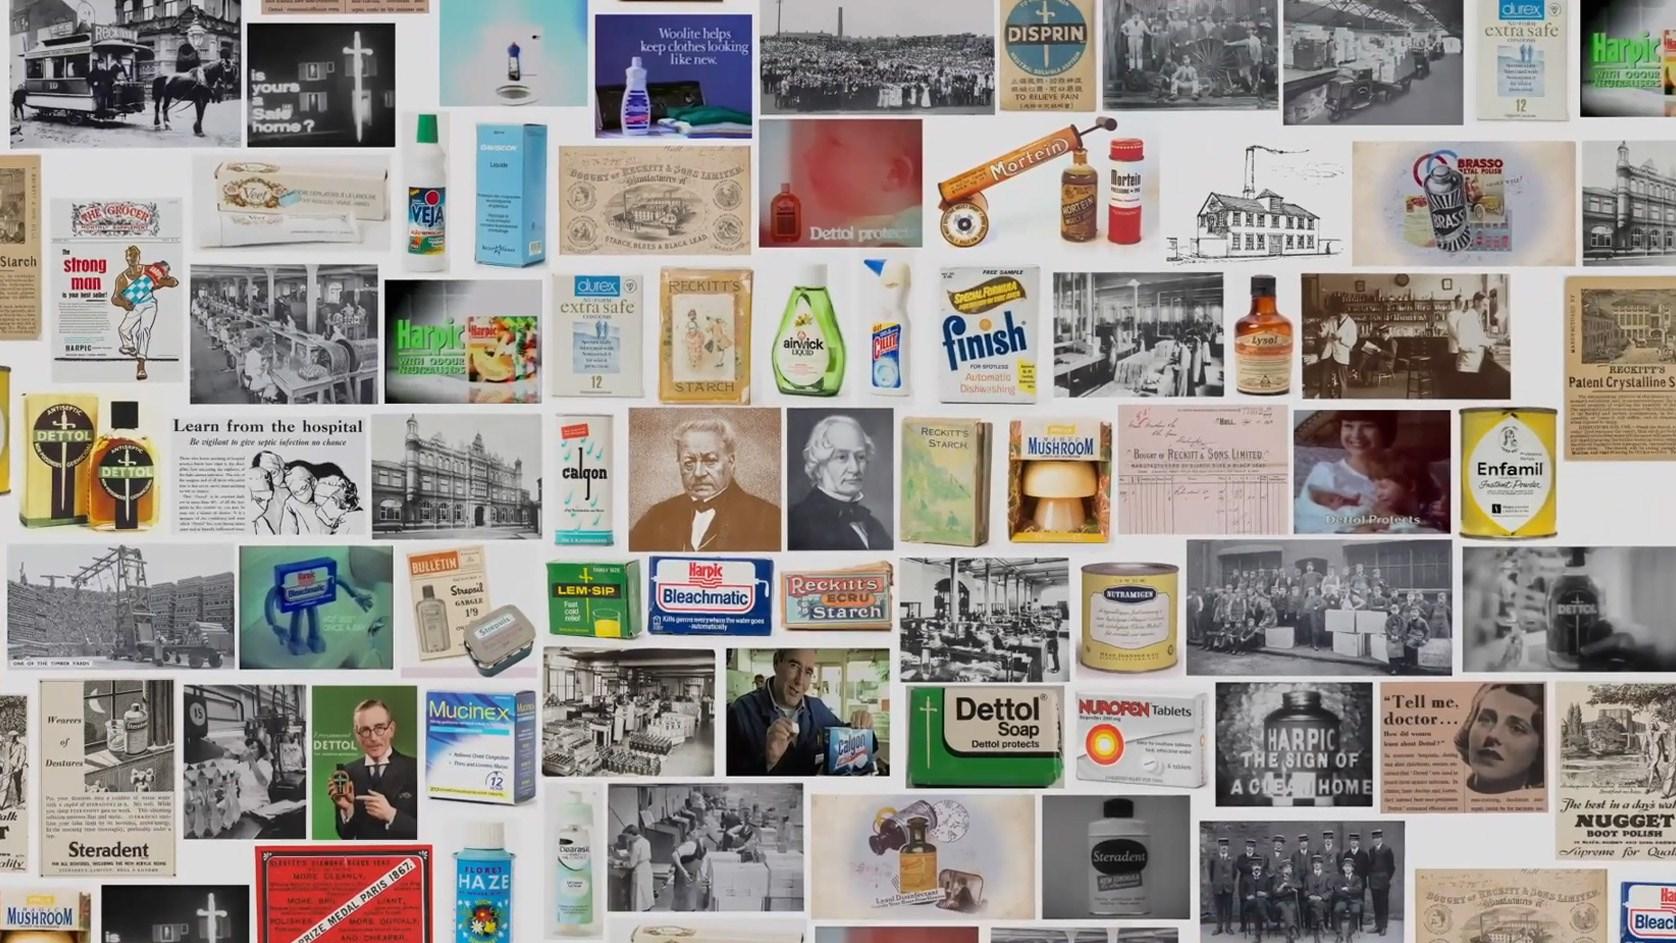 A collage of vintage Reckitt advertisements